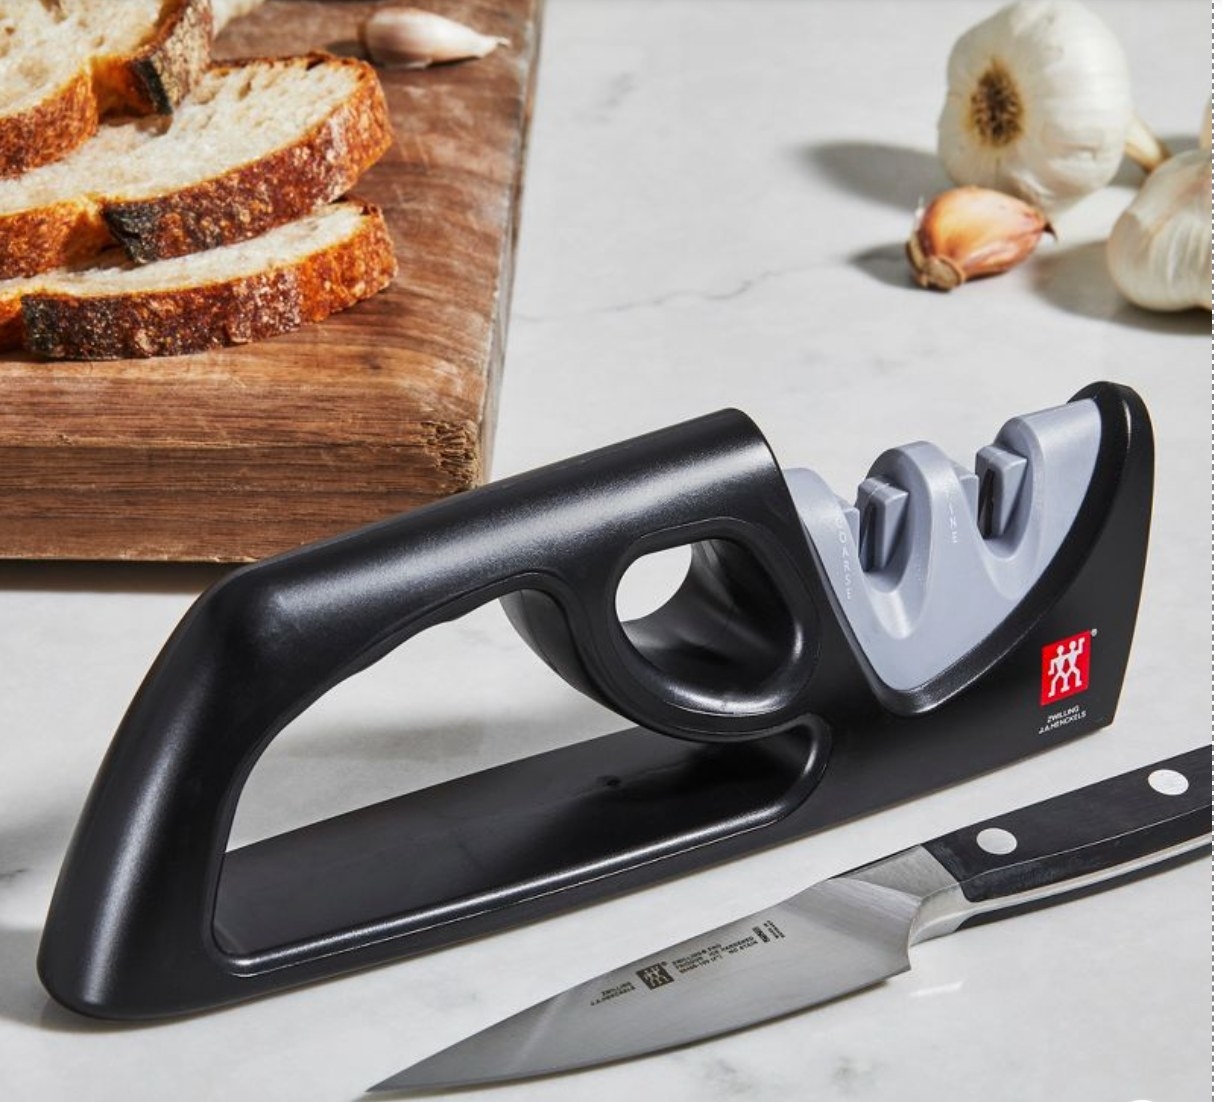 the black sharpener on a counter with bread, garlic, and a knife